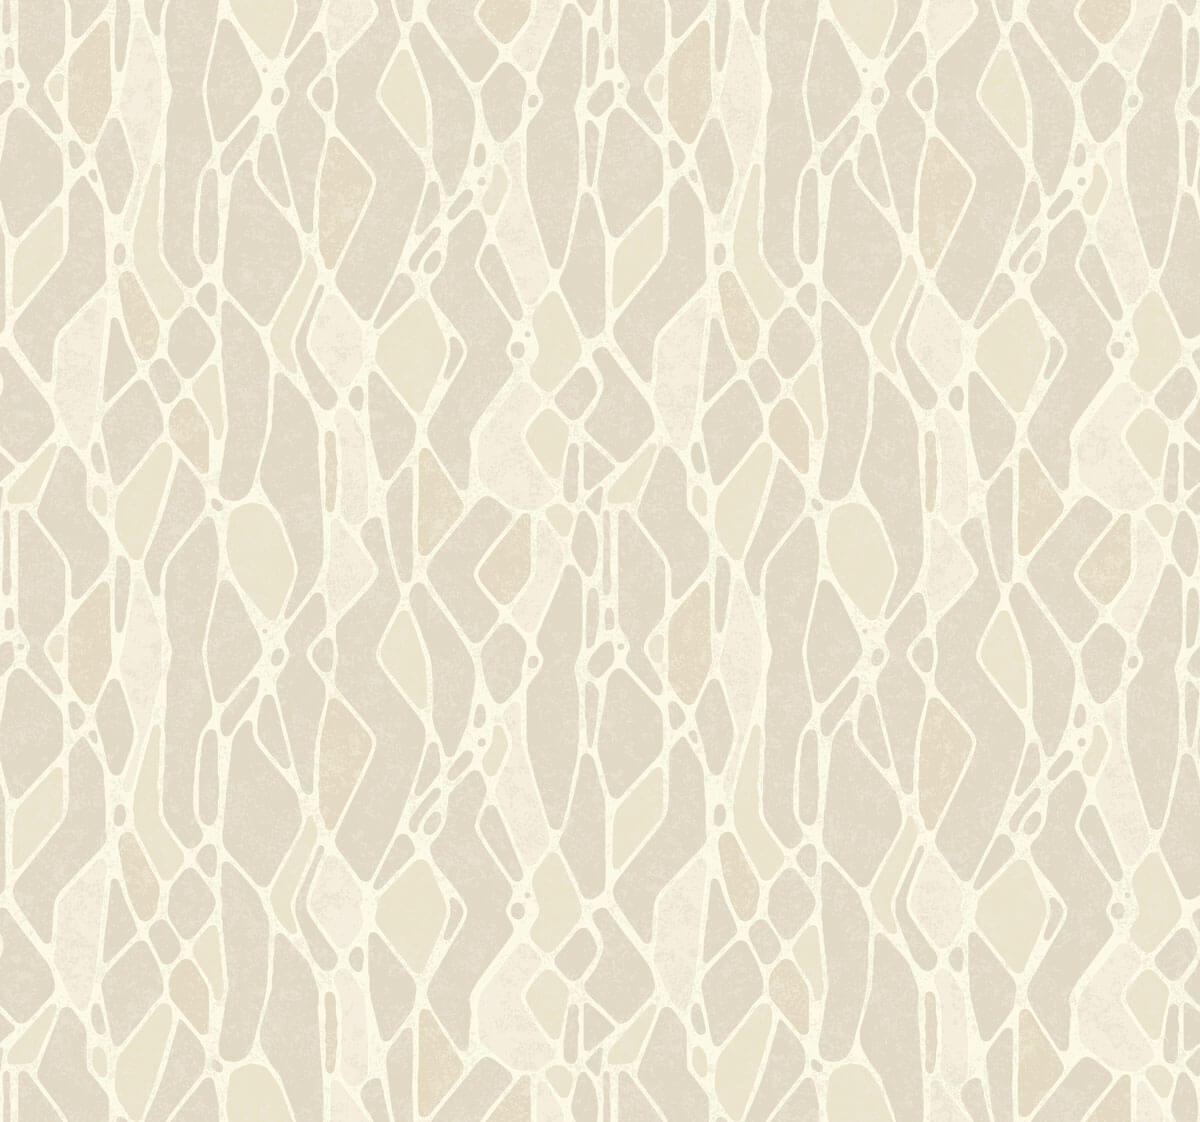 Candice Olson Botanical Dreams Stained Glass Wallpaper - Taupe